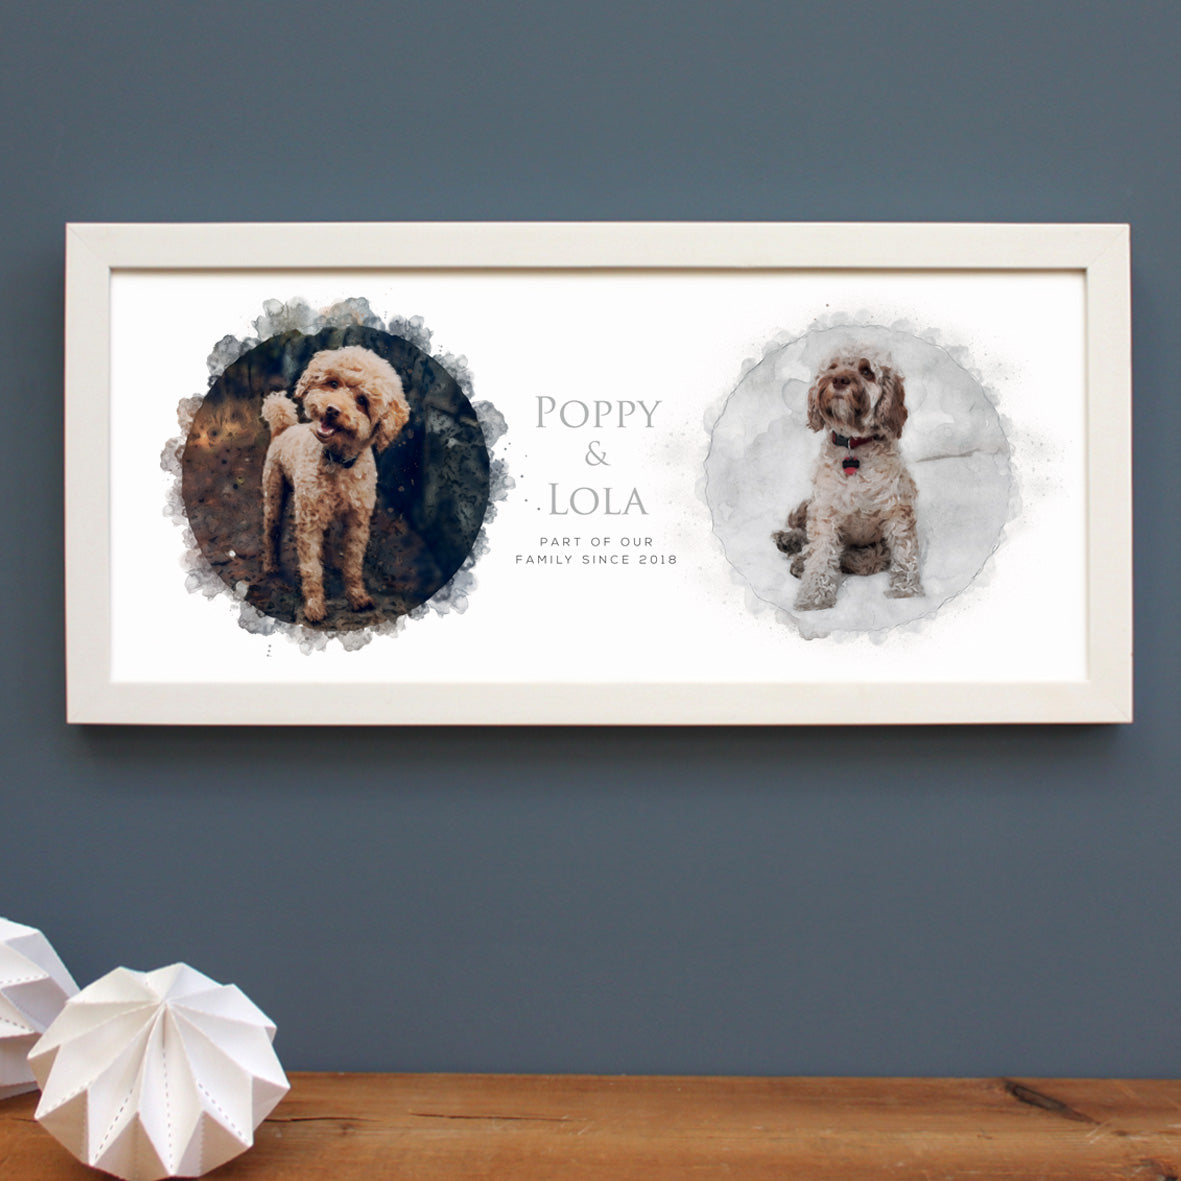 cockerpoo and labradoodle two dog illustrations in a white frame